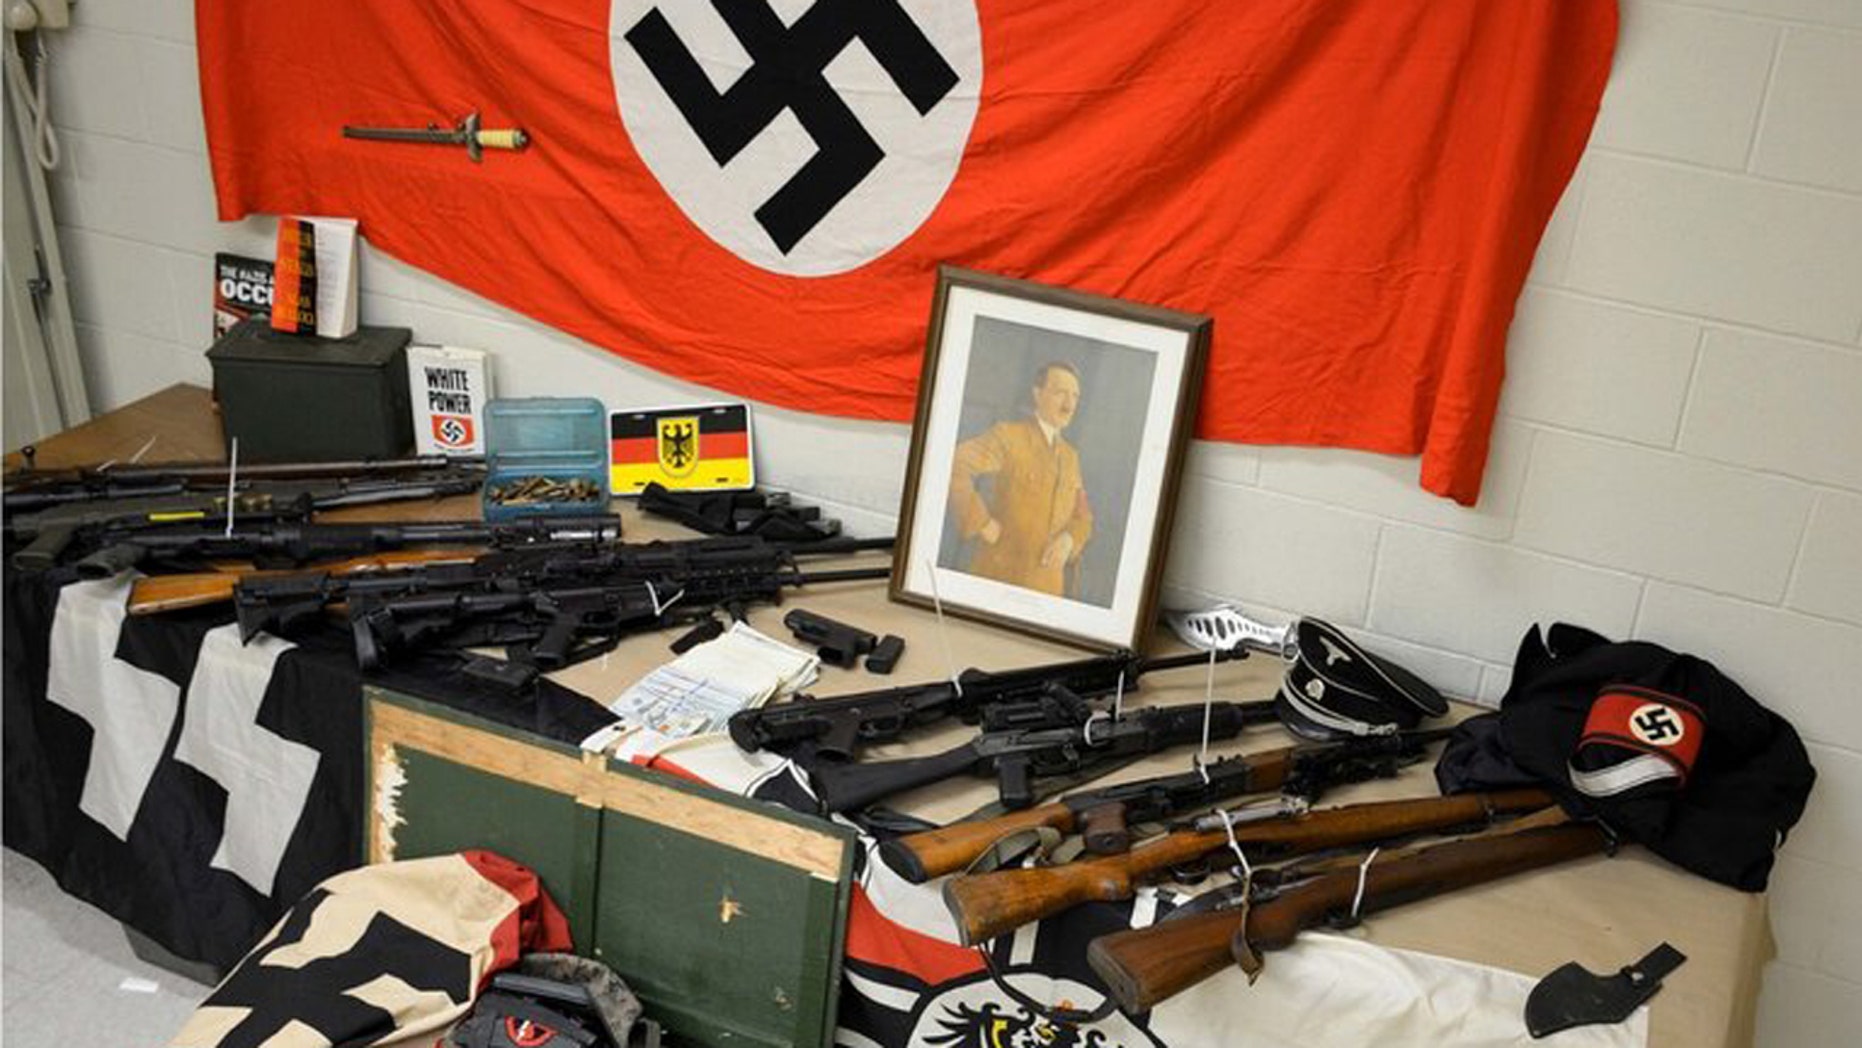 Brothers Arrested After Weapons Nazi Paraphernalia Found At Long